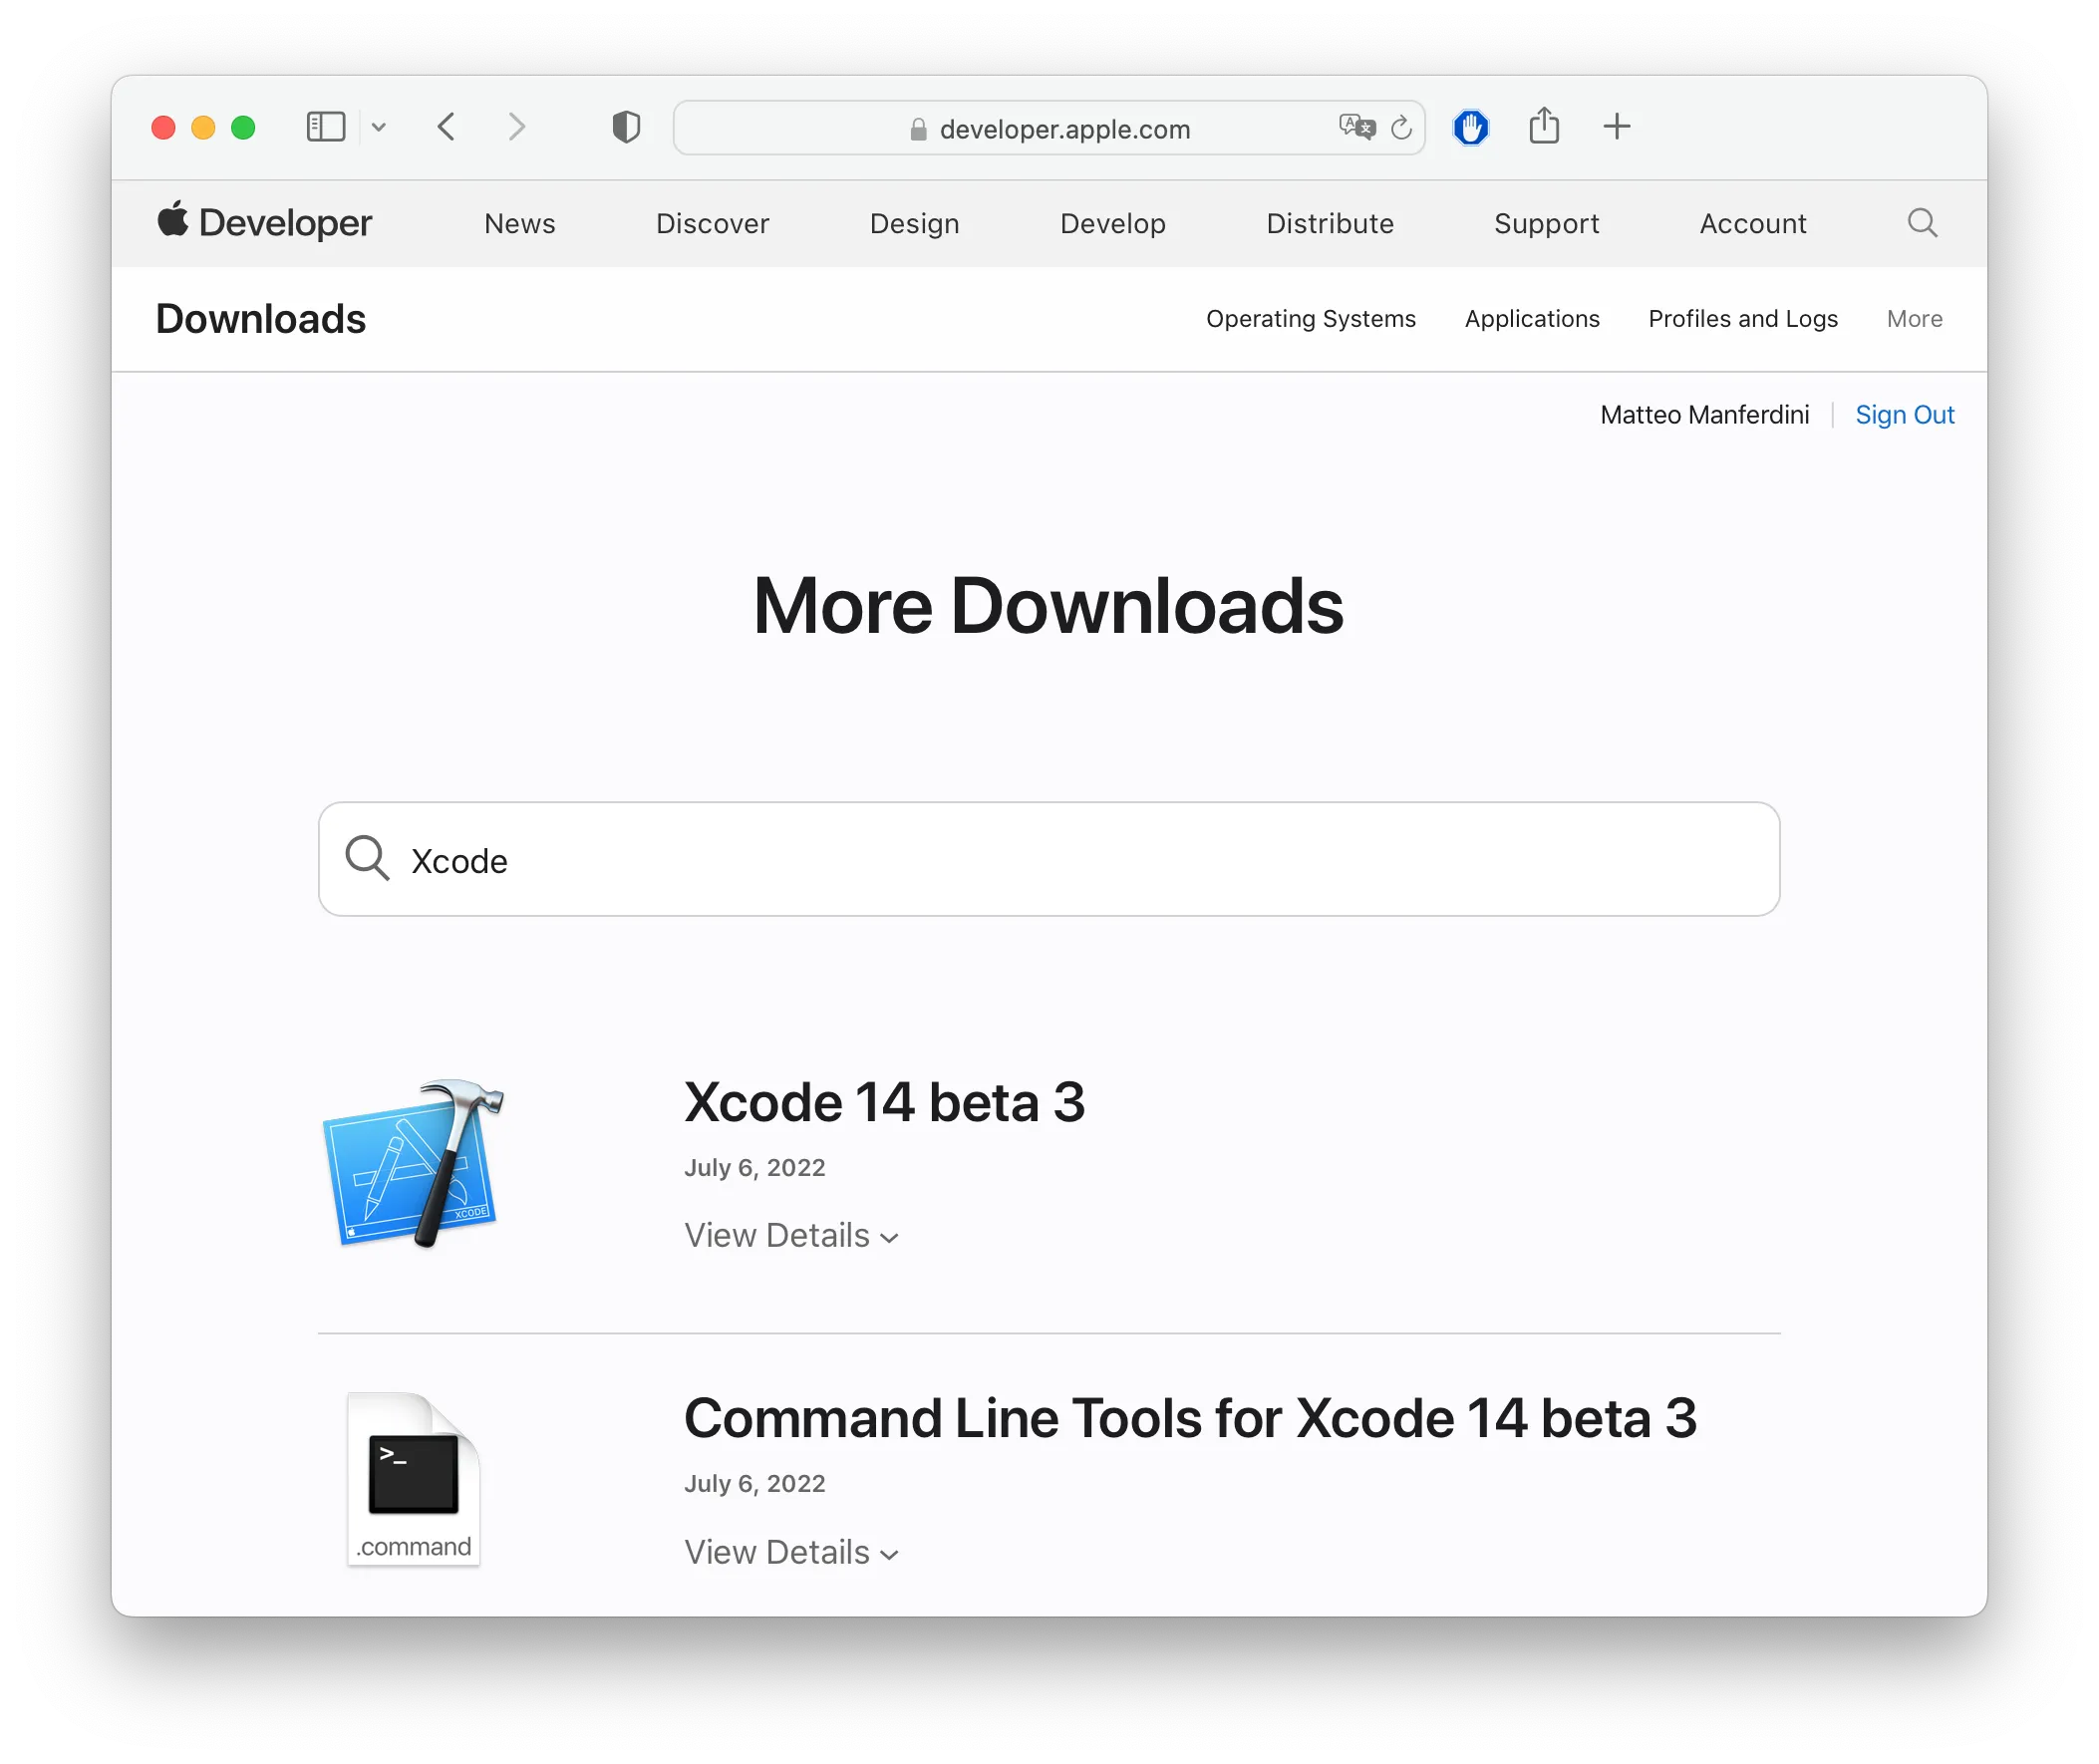 Apple’s download page for all the versions Xcode